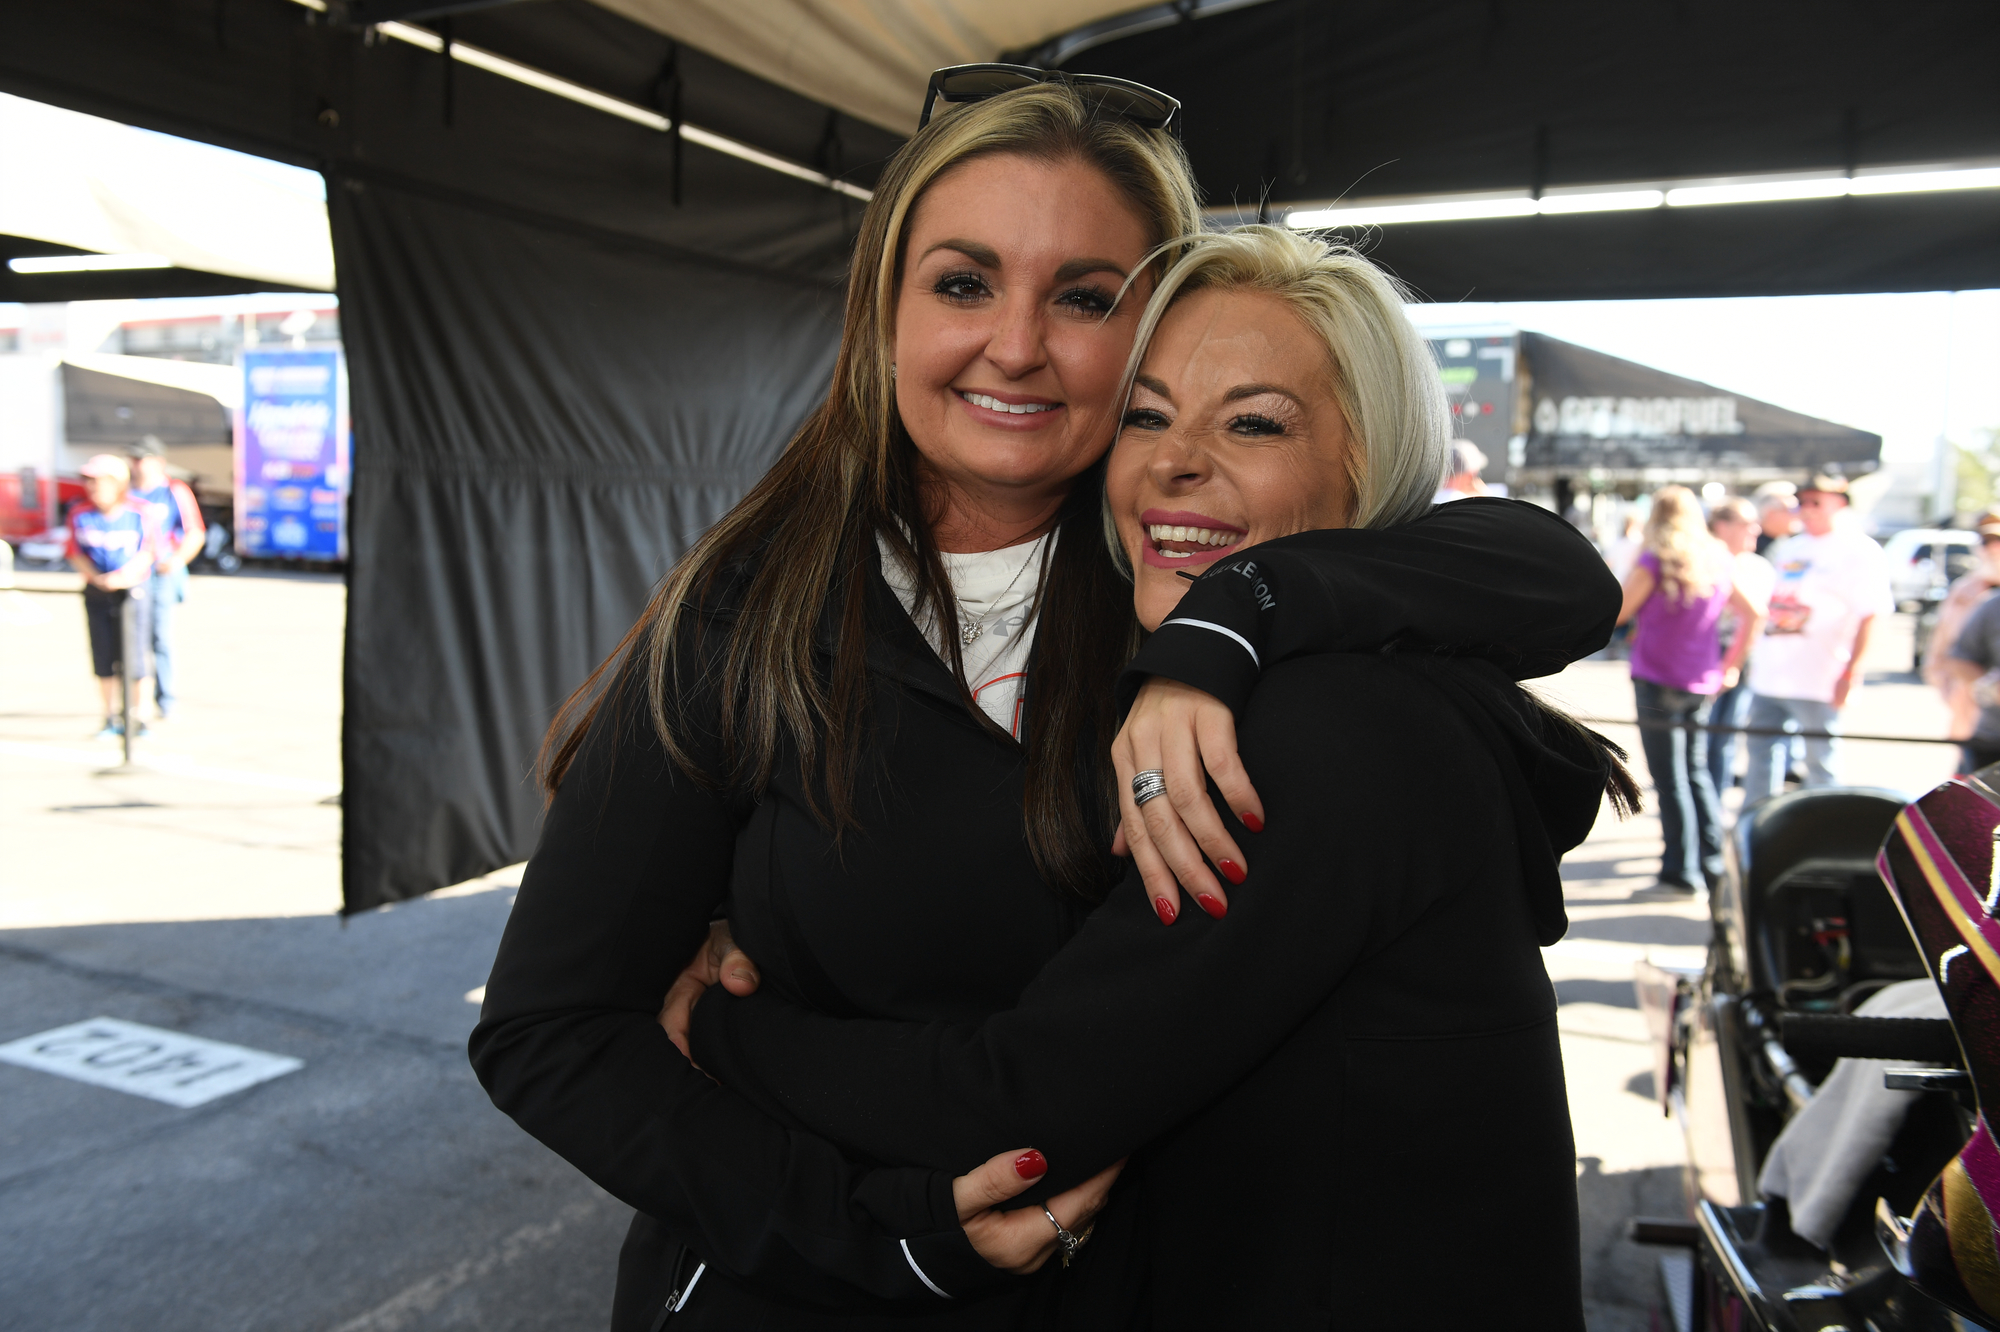 Erica Enders and Angie Smith